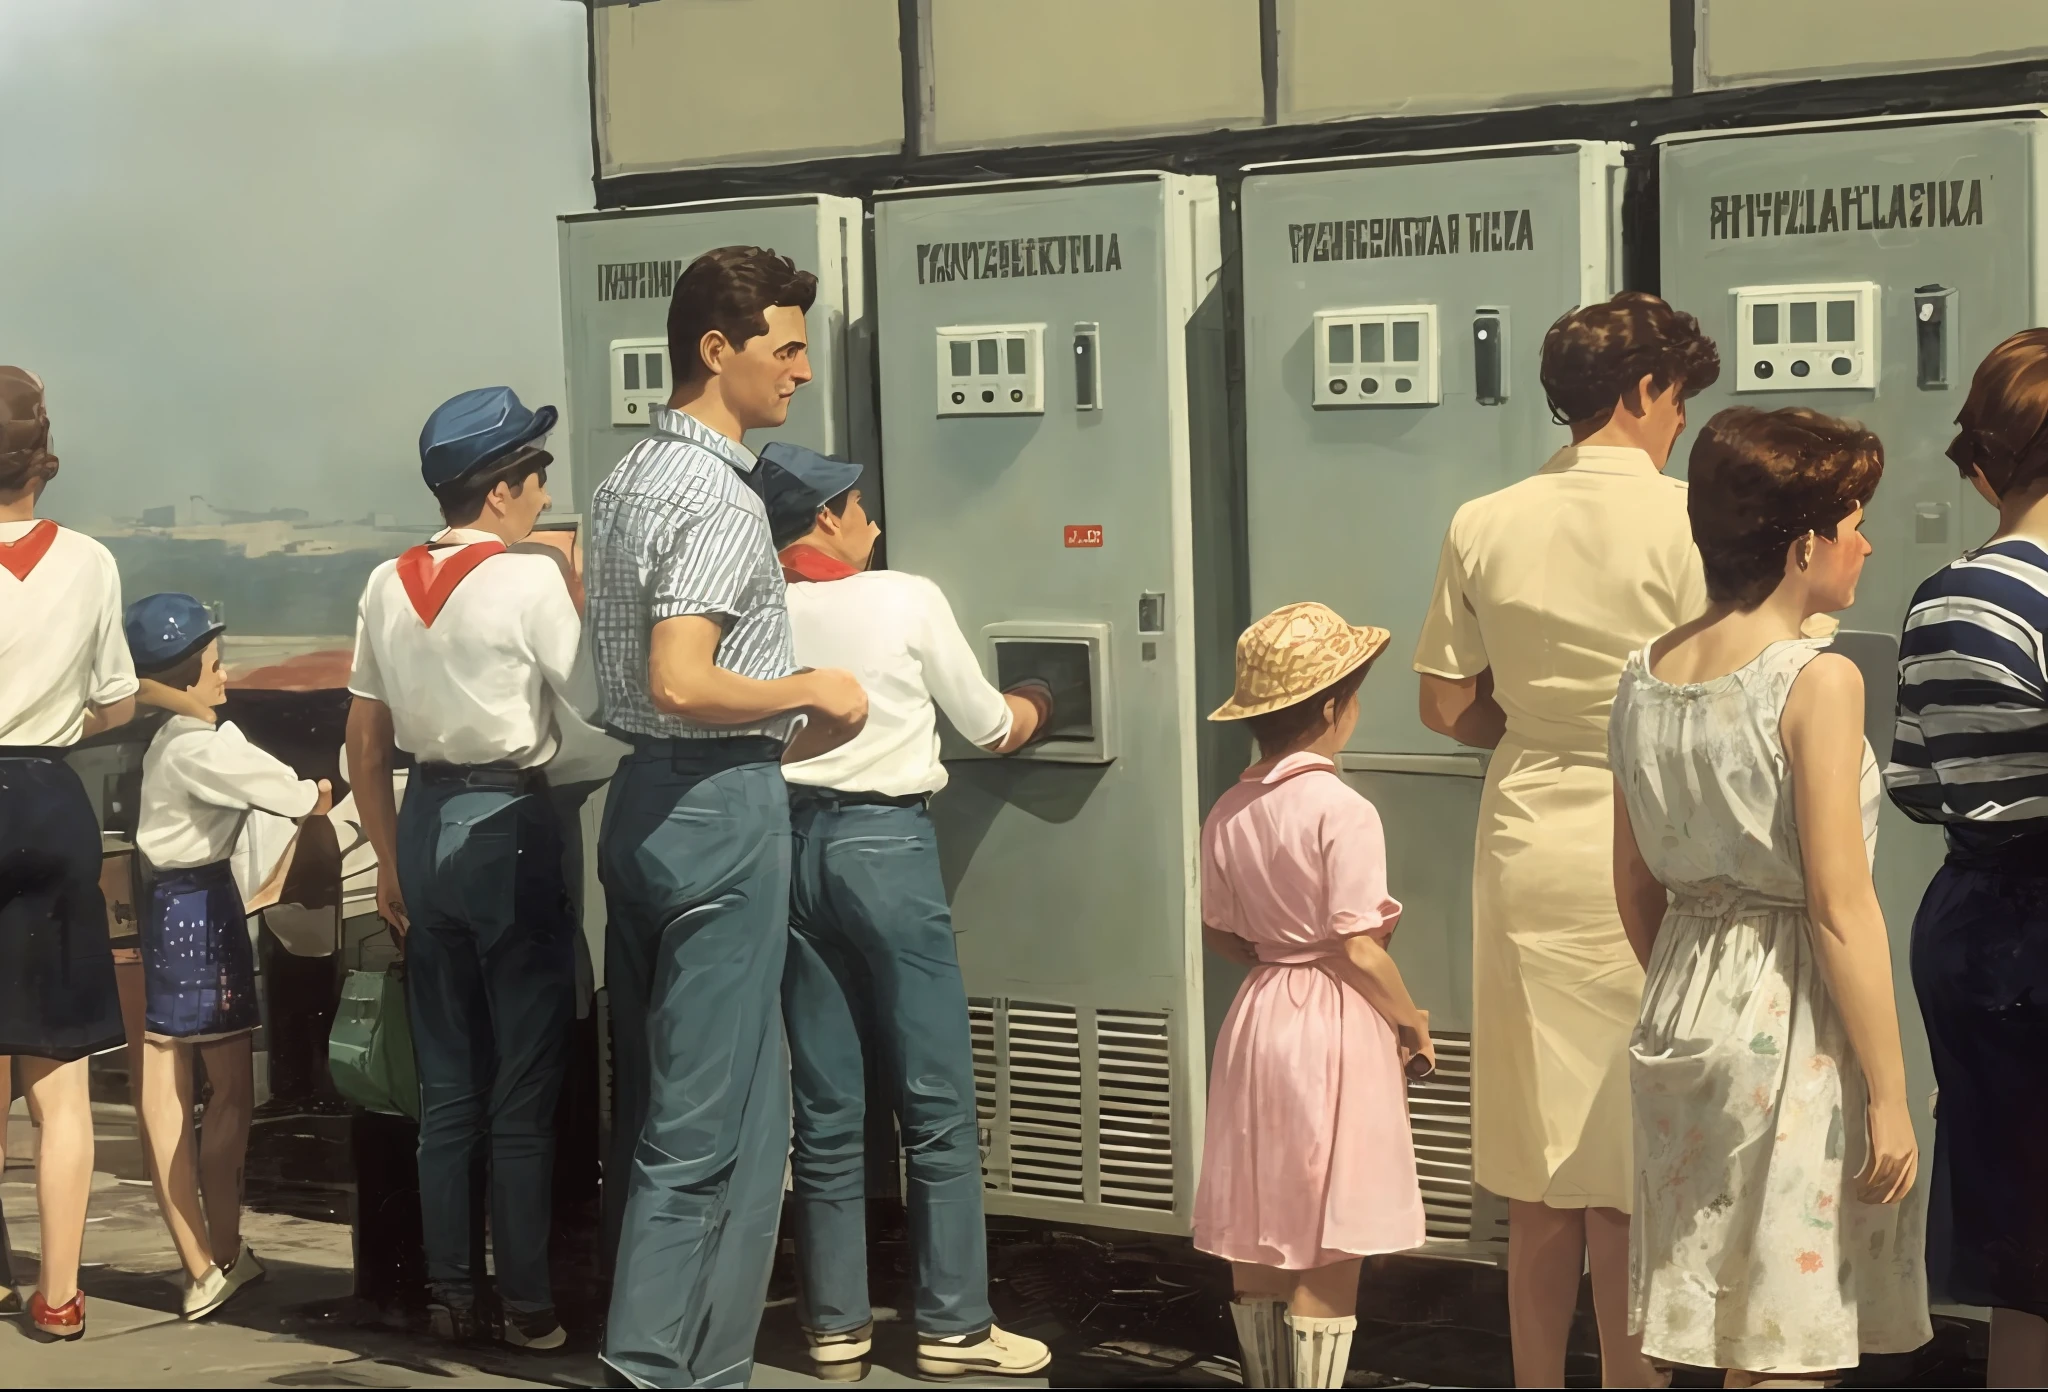 people, Standing in line, To get food from the vending machine, soviet nostalgia, soviet bus stop, Photos from the 80s, historical image, historical picture, 1962 soviet, typical russian atmosphere, soviet style, russian city of the future, Old computers on the sidewalk, soviet - era, ussr, historical photo